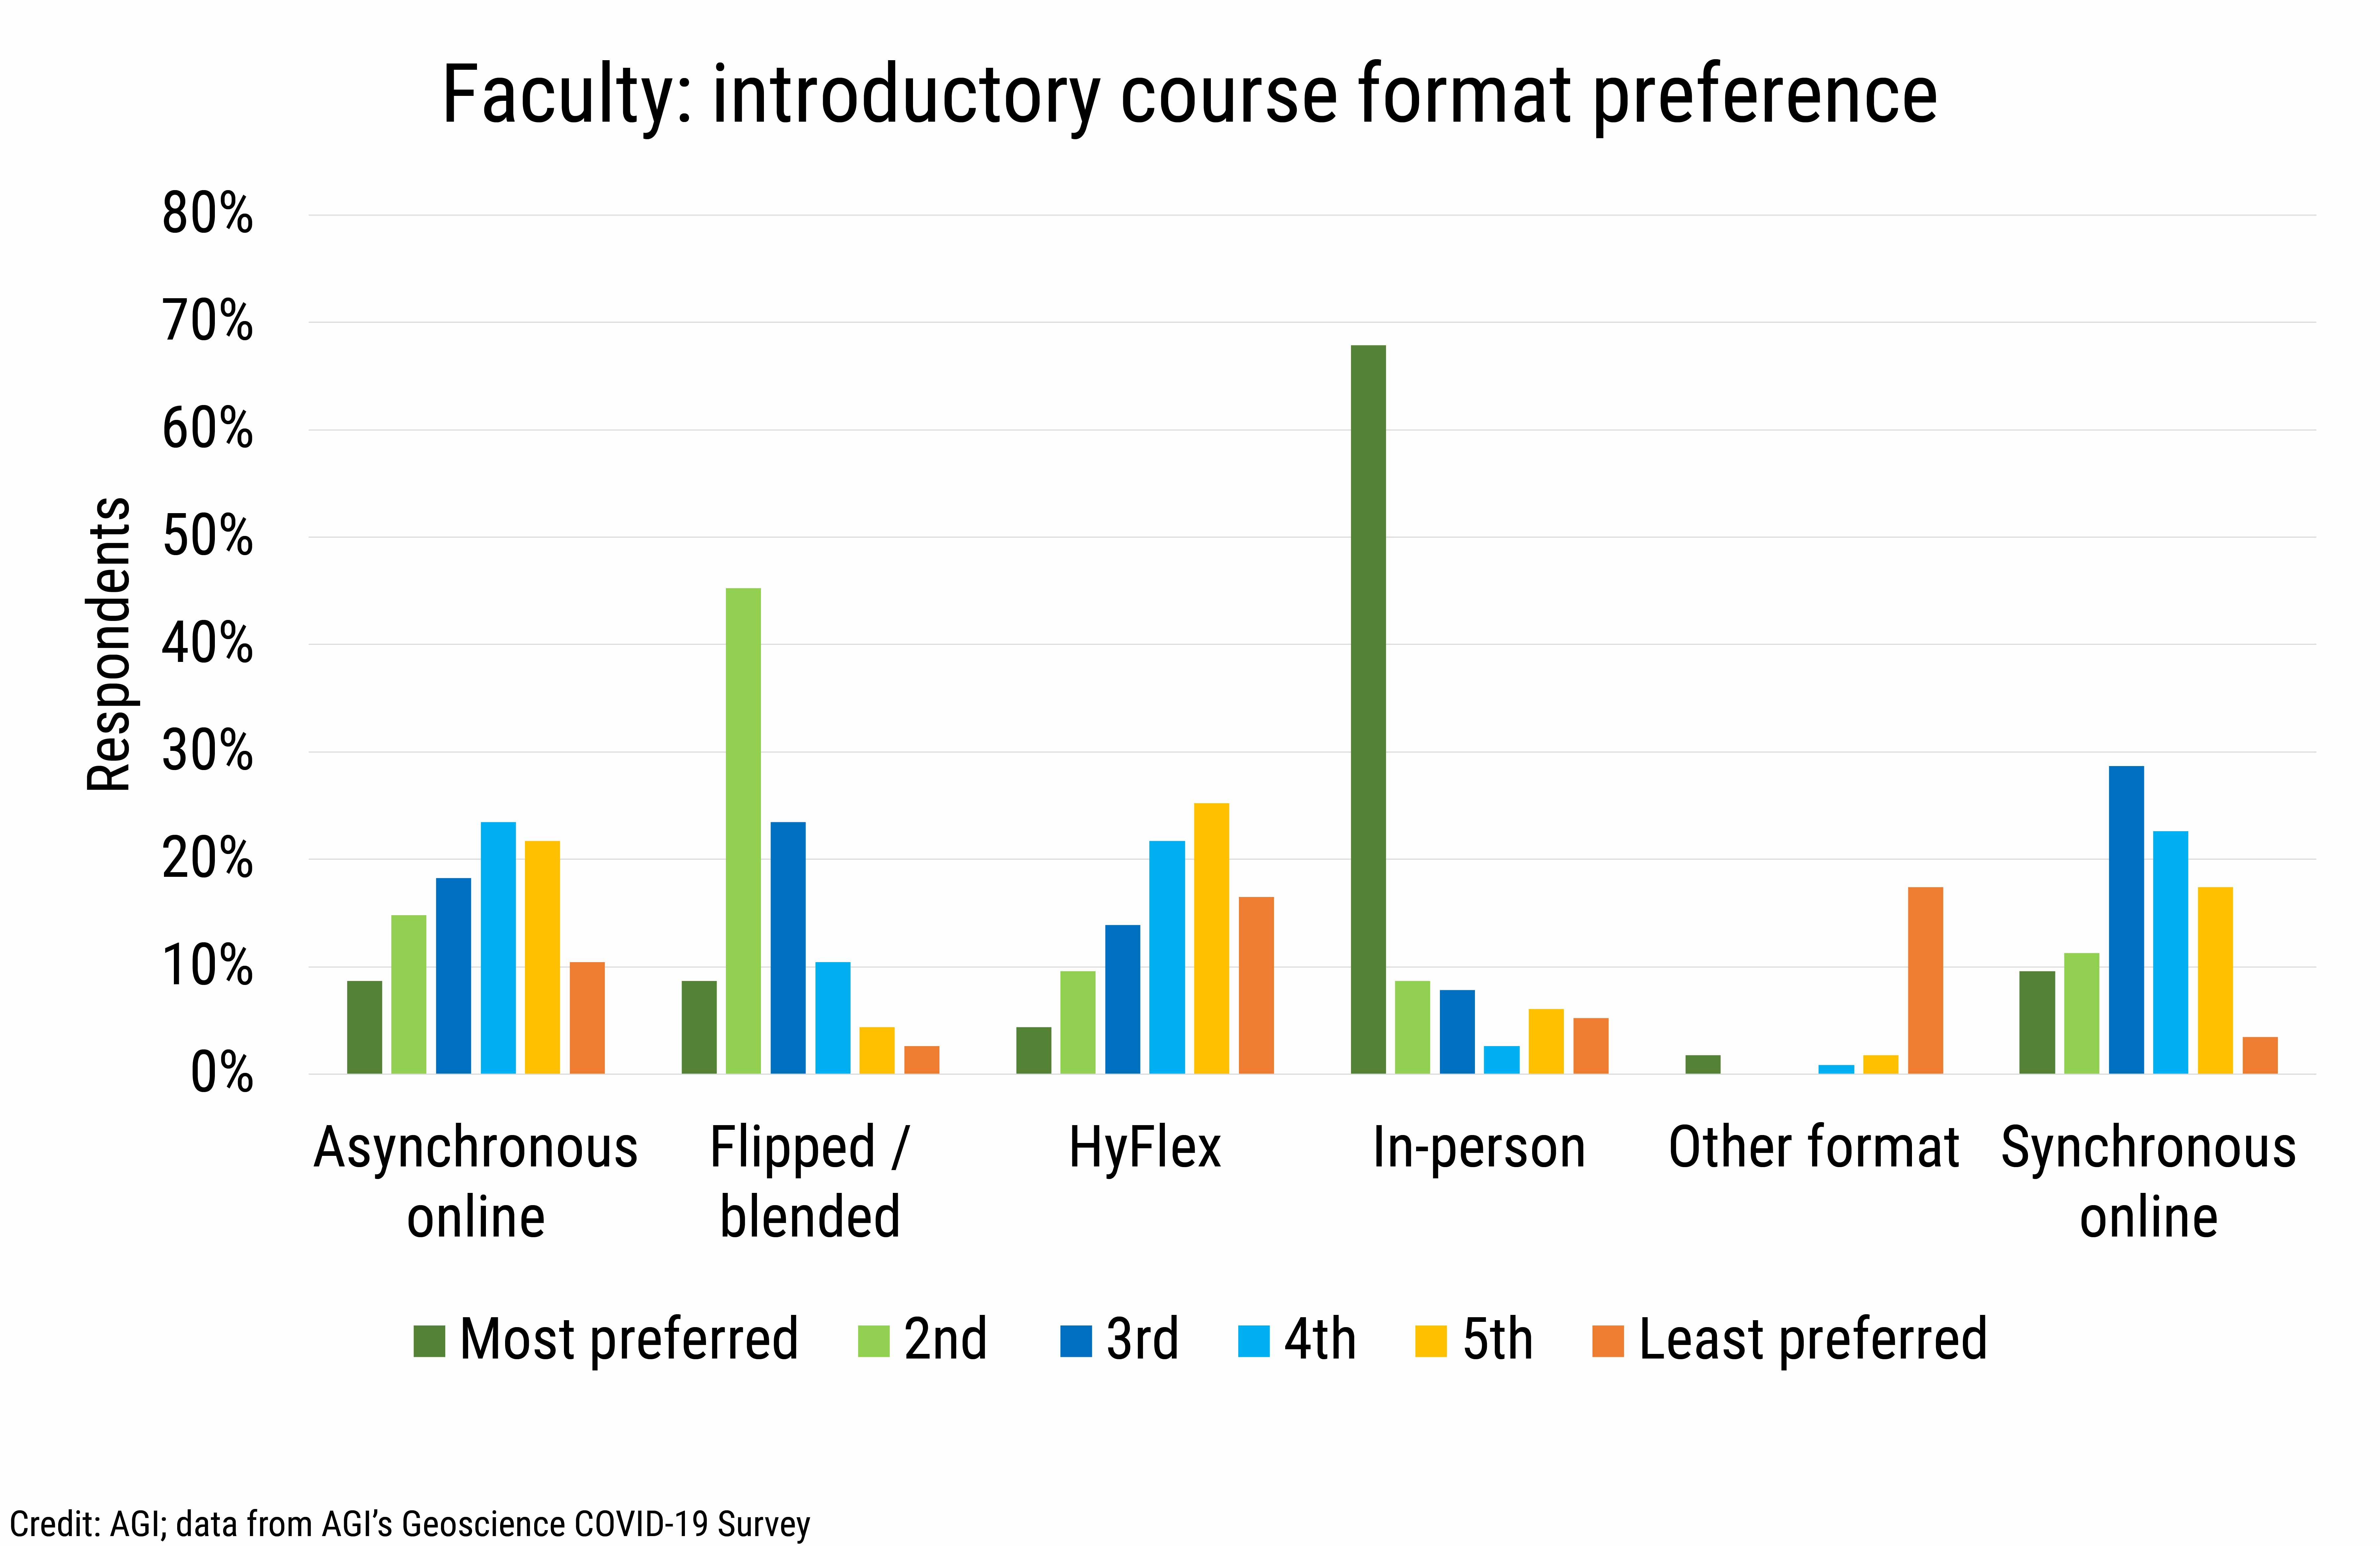 DB_2020-031 chart02 Faculty introductory course format preference (Credit: AGI; data from AGI's Geoscience COVID-19 Survey)